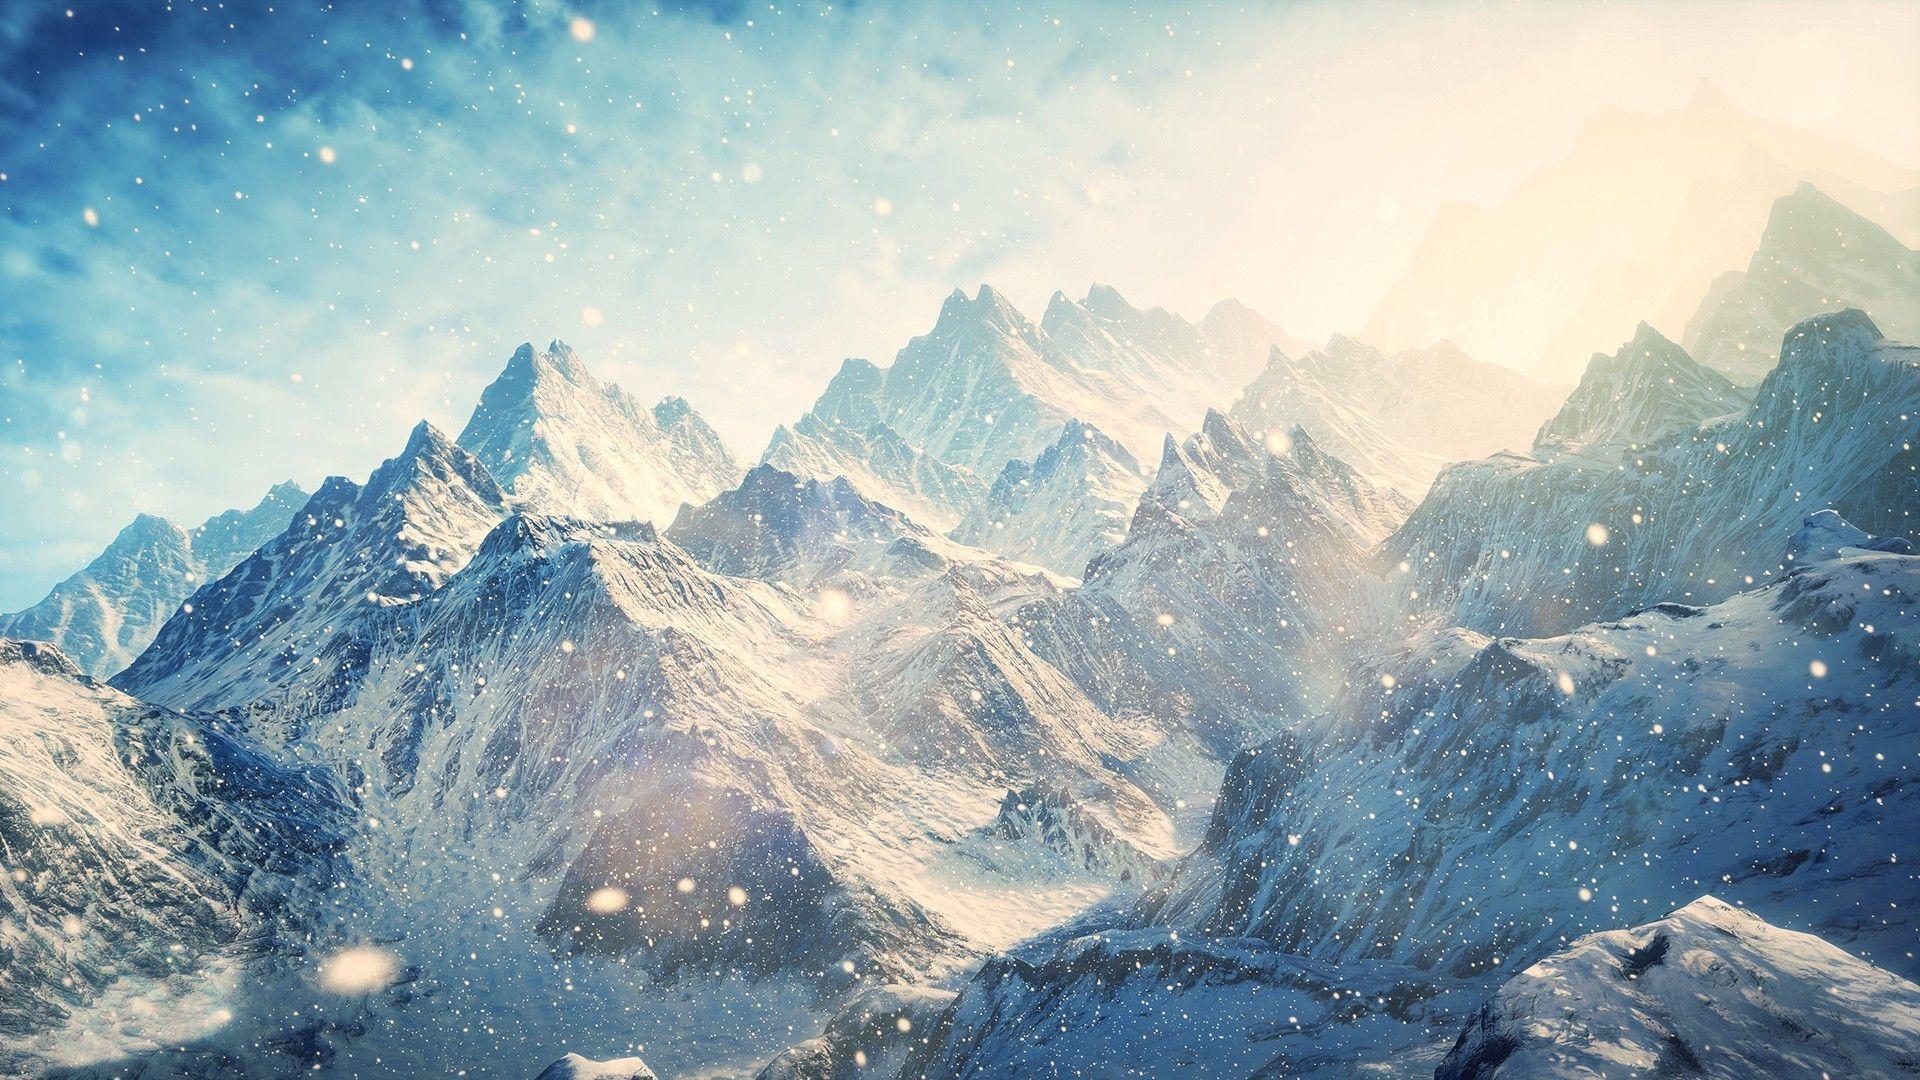 Snowy Mountains Wallpapers 1920x1080